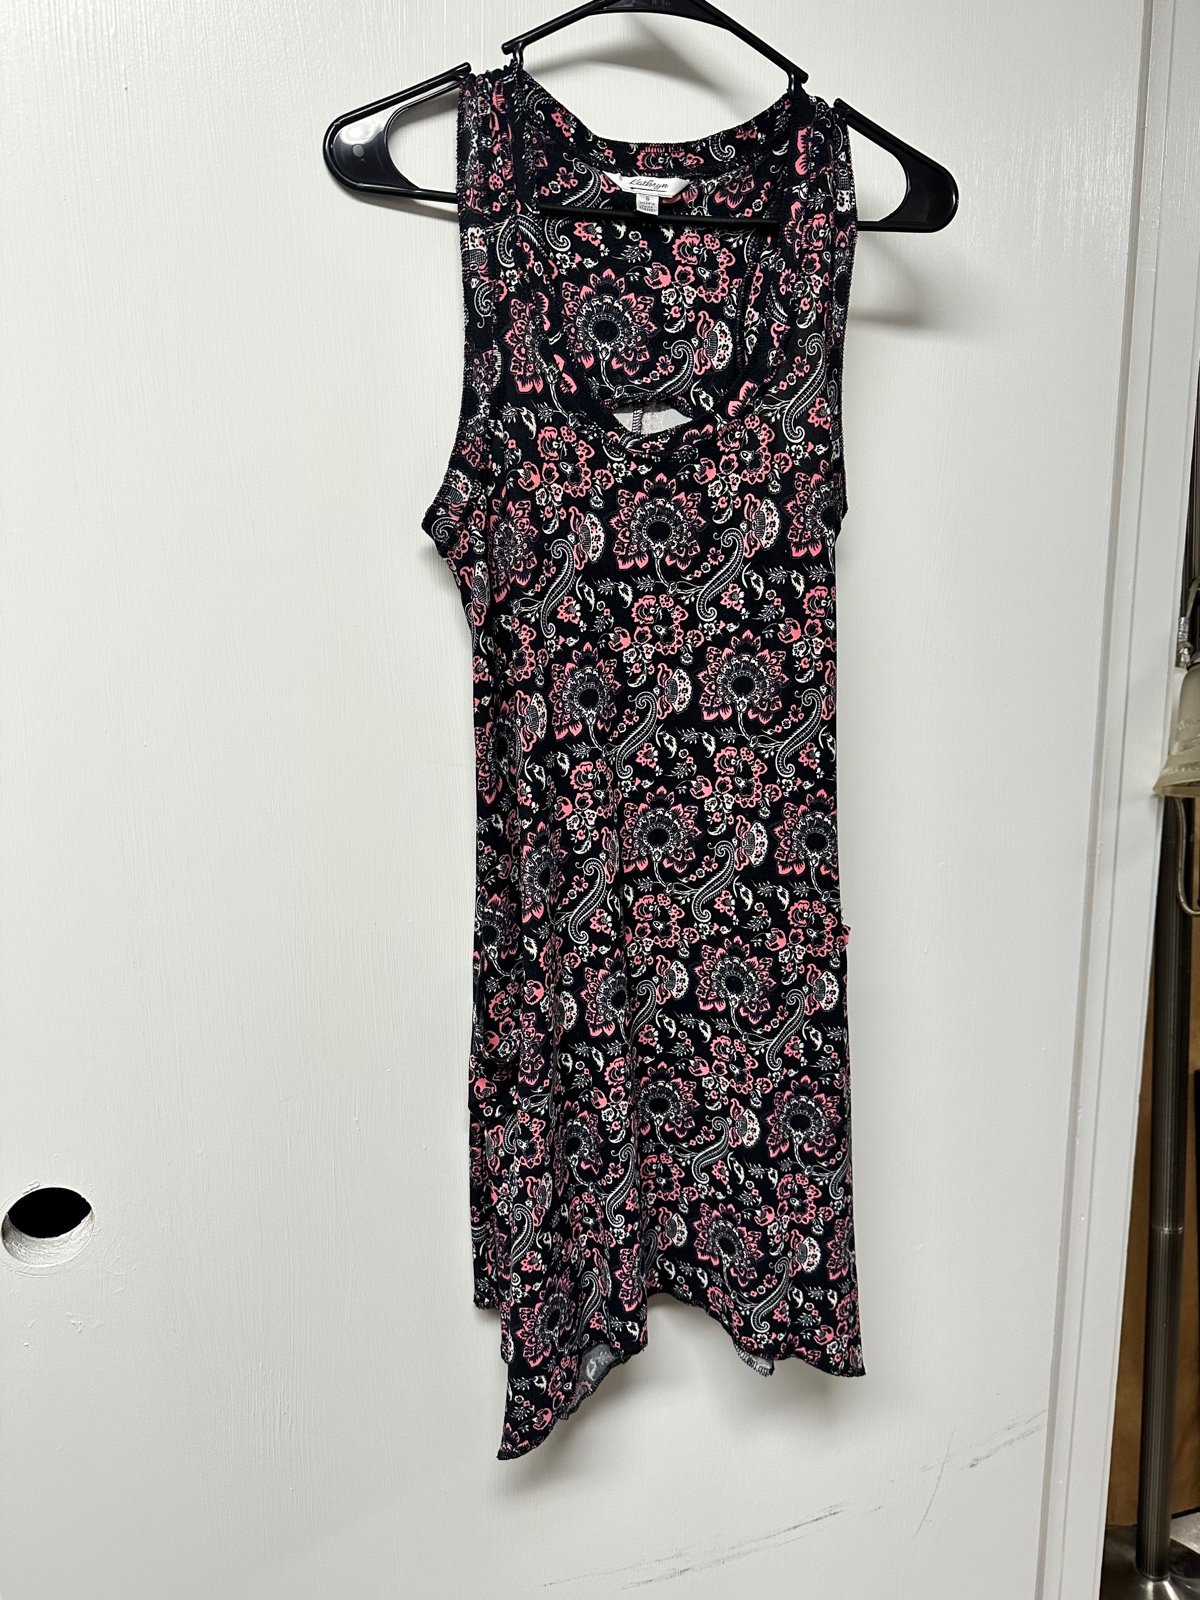 Great Cotton printed dress with pockets P2pF8yXnd Online Shop